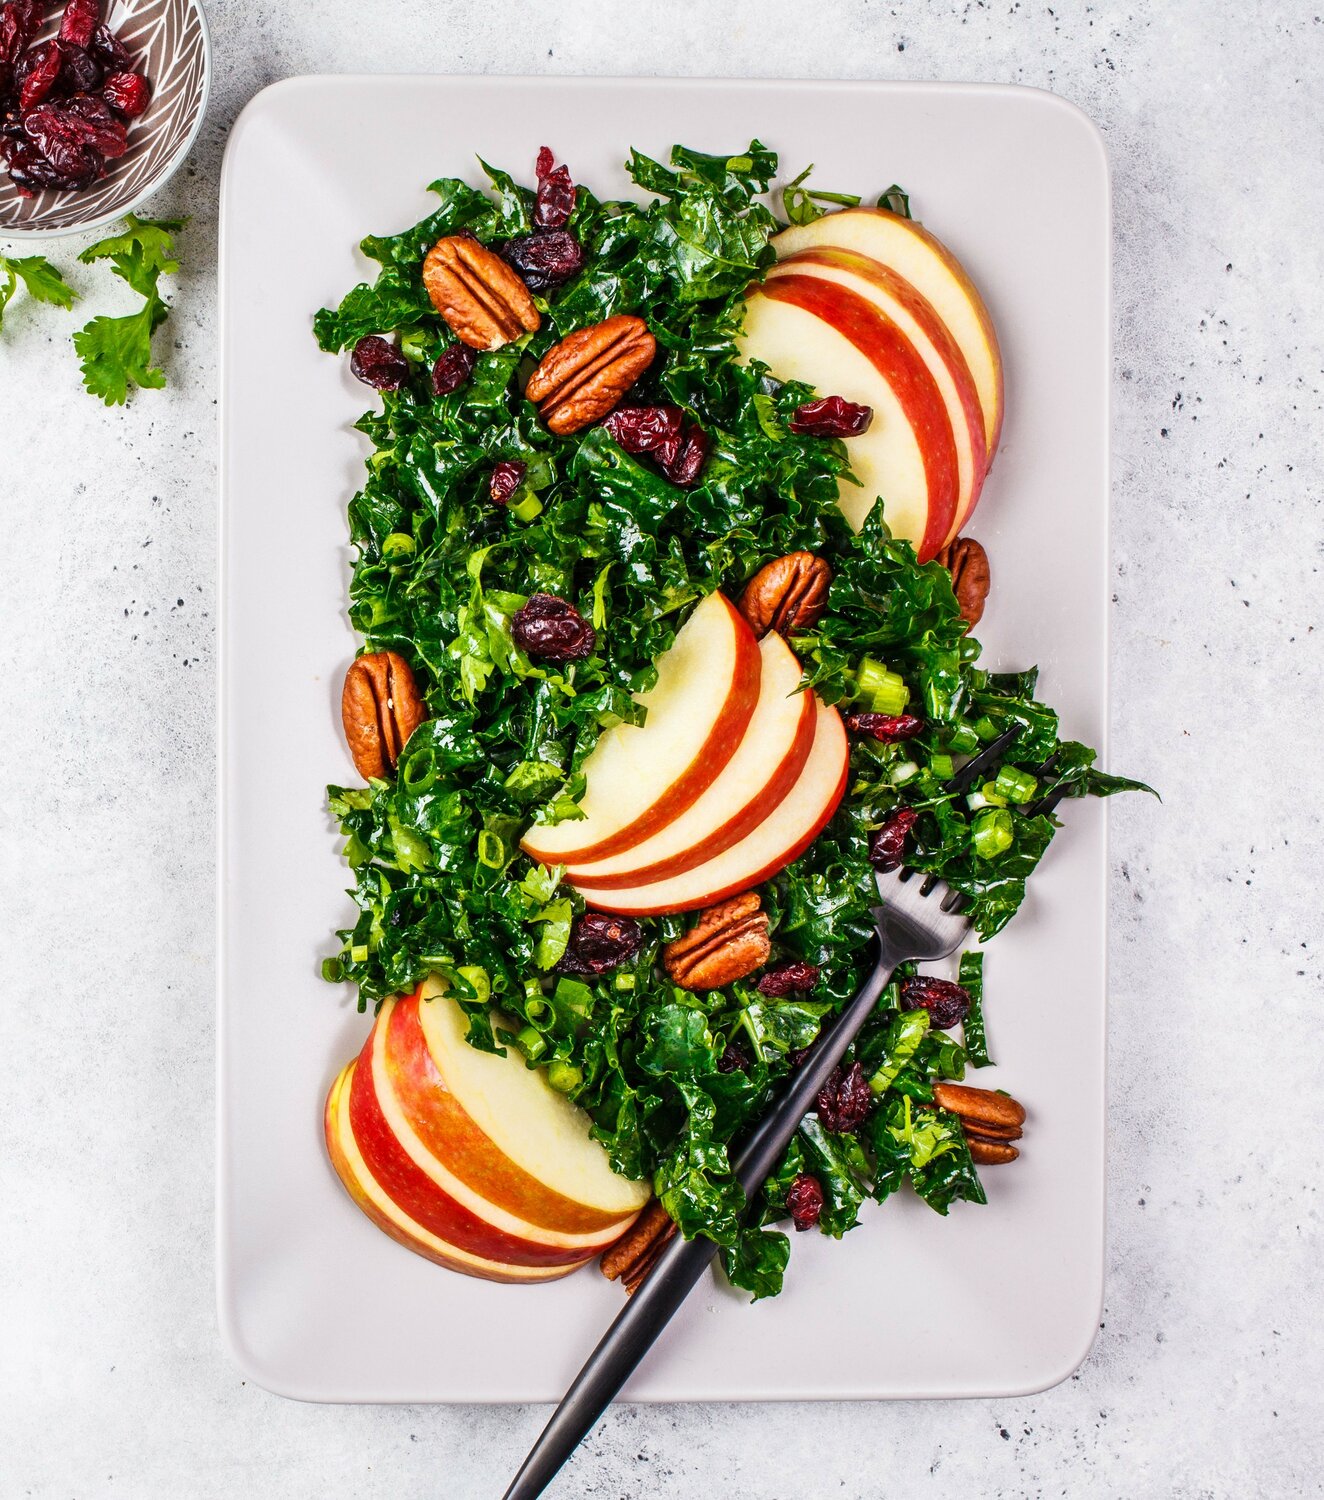 Healthy vegan salad with apple, cranberry, kale and pecan in a rectangular plate, top view.